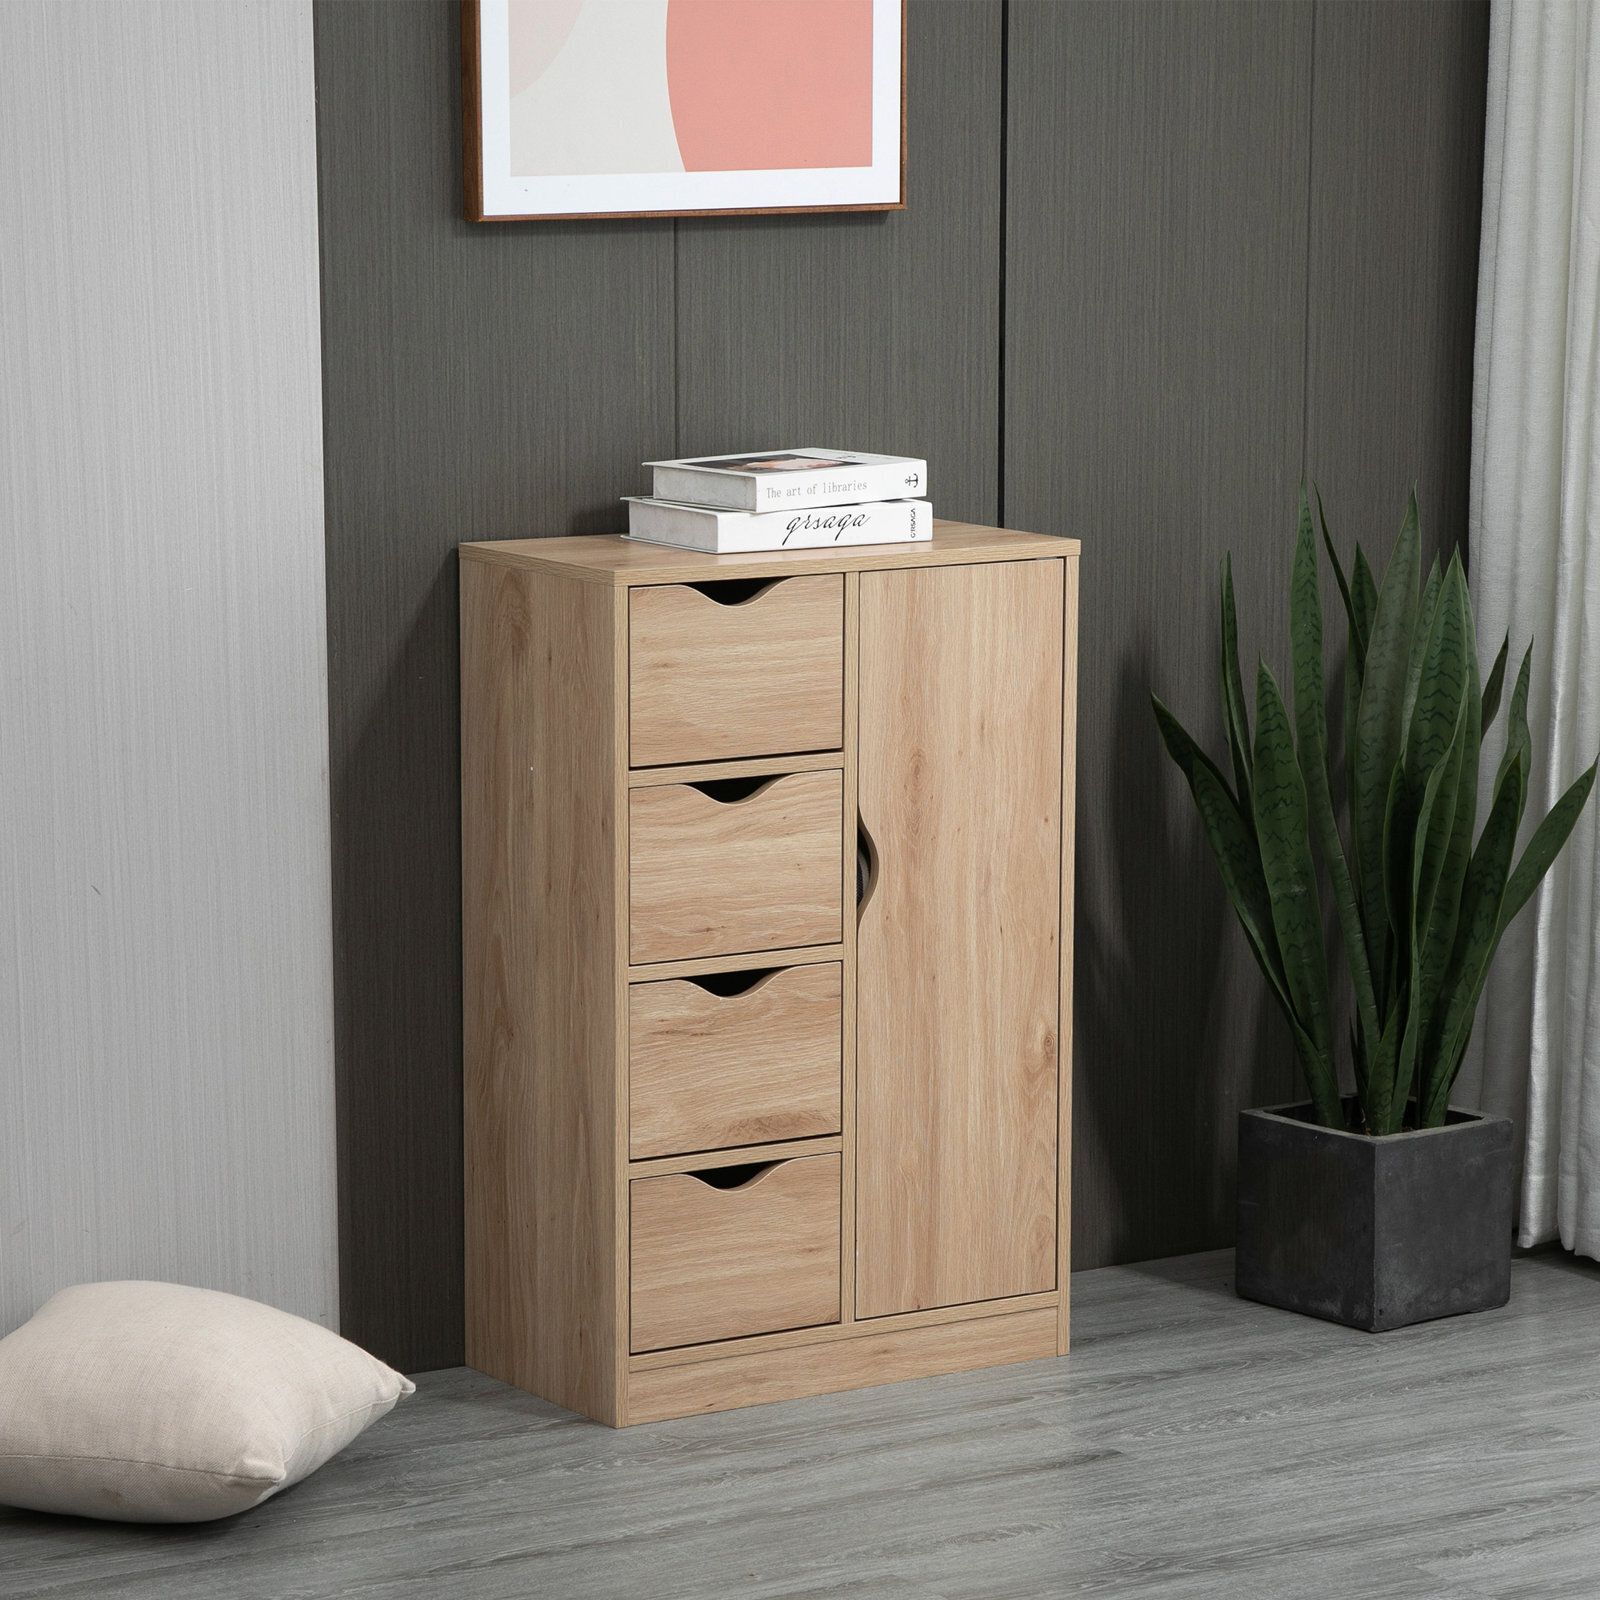 Small Wooden Cabinet With Drawers – Foter In Wood Cabinet With Drawers (View 7 of 15)